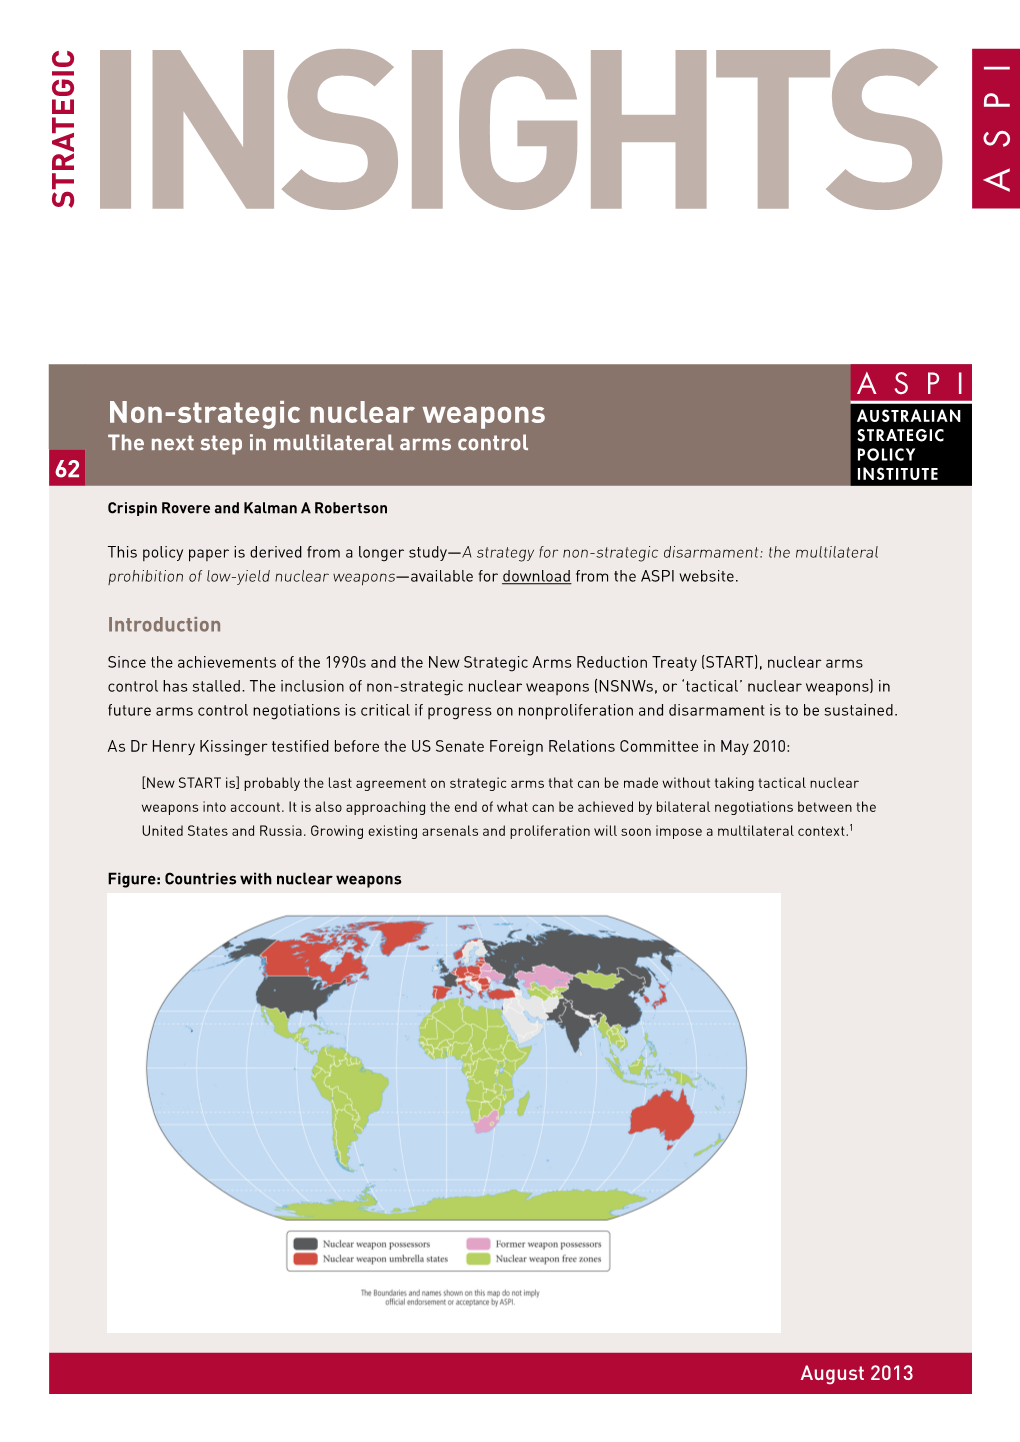 Non-Strategic Nuclear Weapons: the Next Step in Multilateral Arms Control